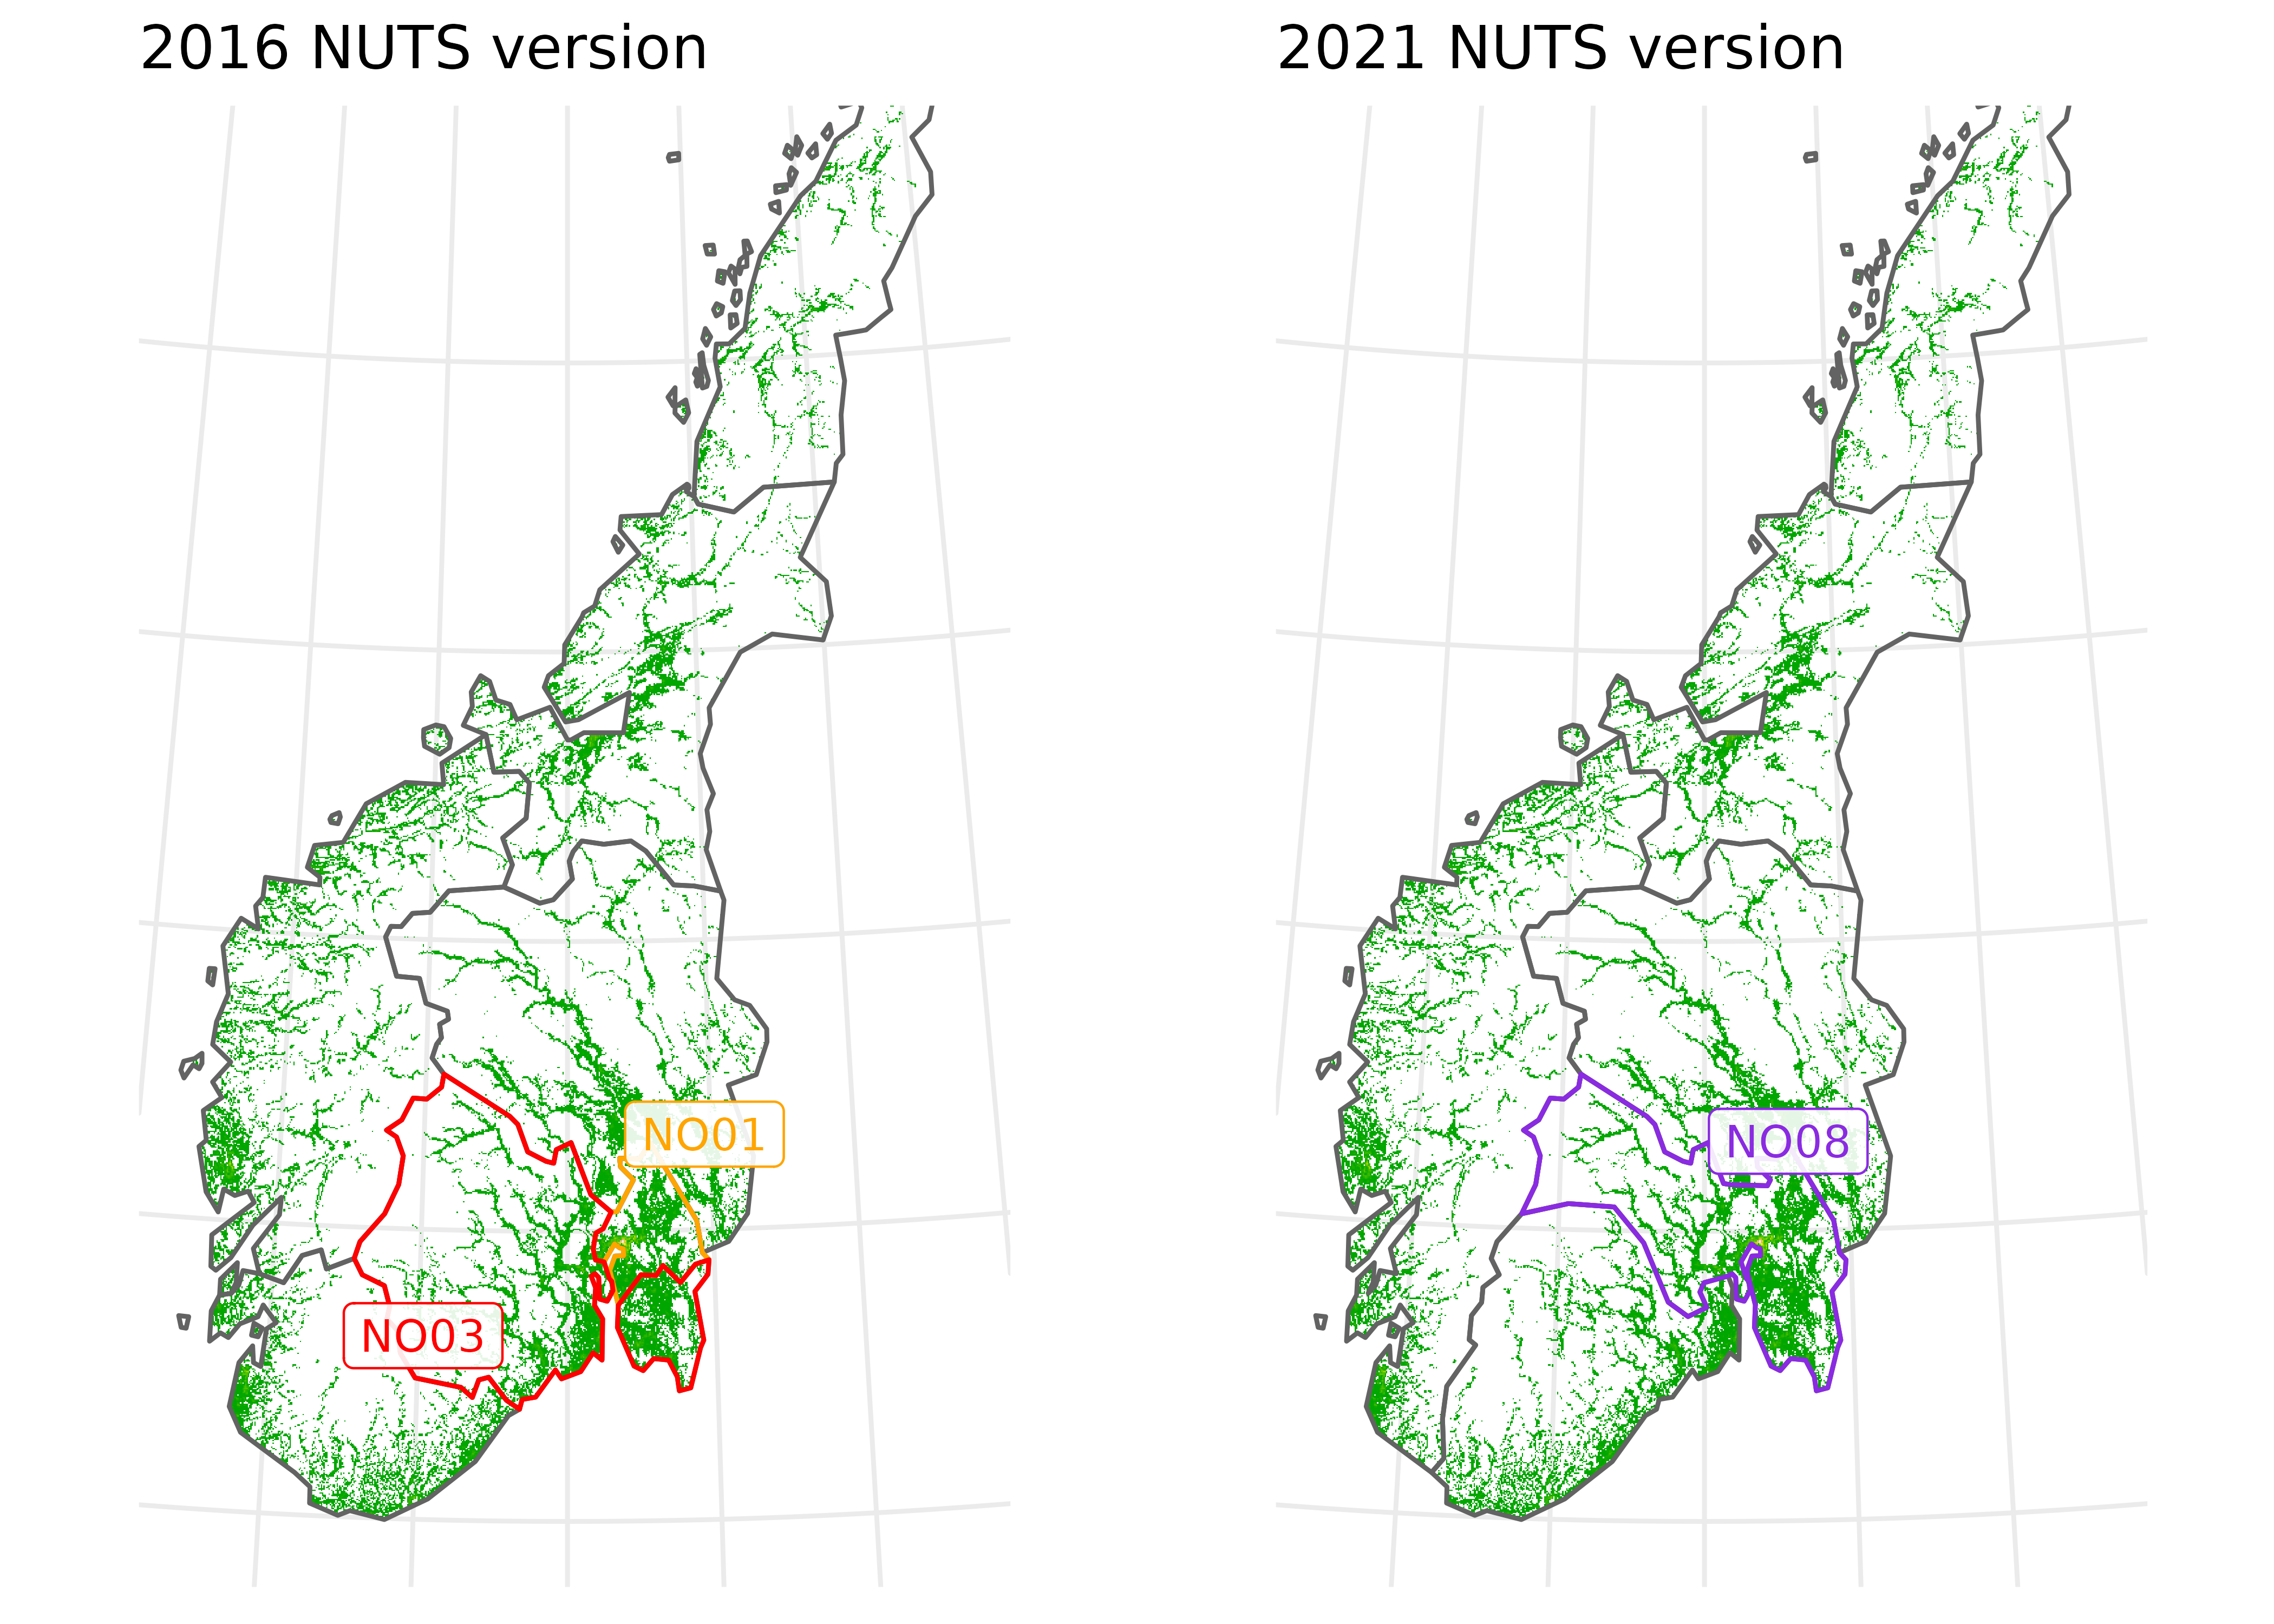 Two maps of Southern Norway with very granular population density and administrative boundaries of the 2016 and 2021 NUTS version. The region with the capital Olso and its adjacent region are highlighted in version 2016 that both contribute to a larger single region in version 2021.